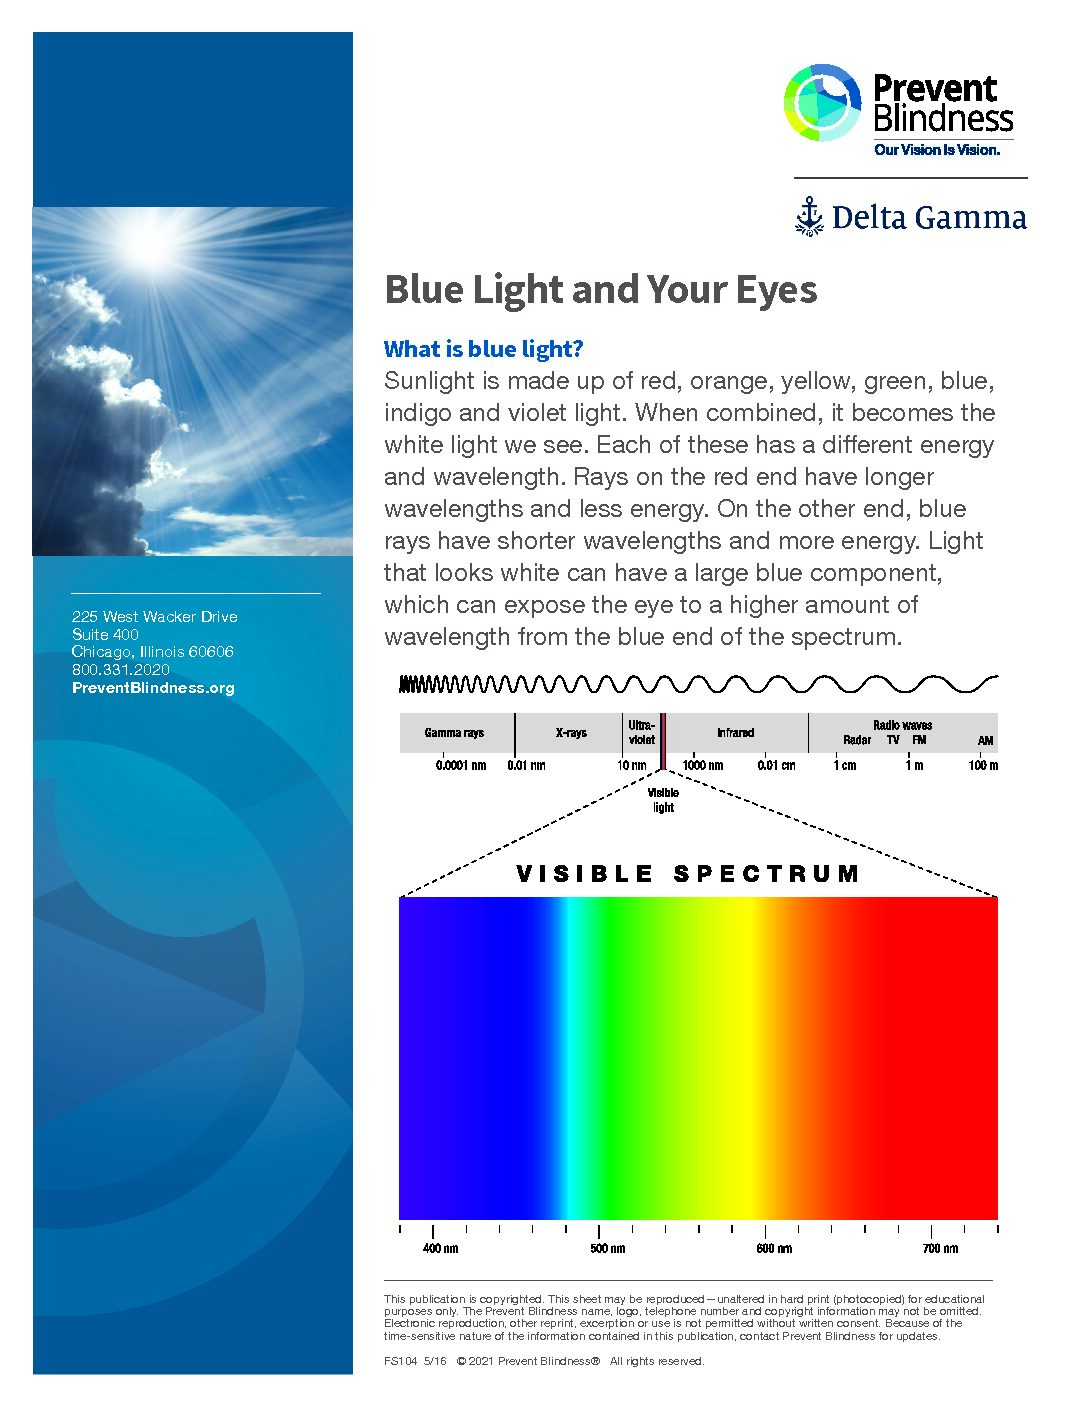 Blue Light and Your Eyes – Delta Gamma